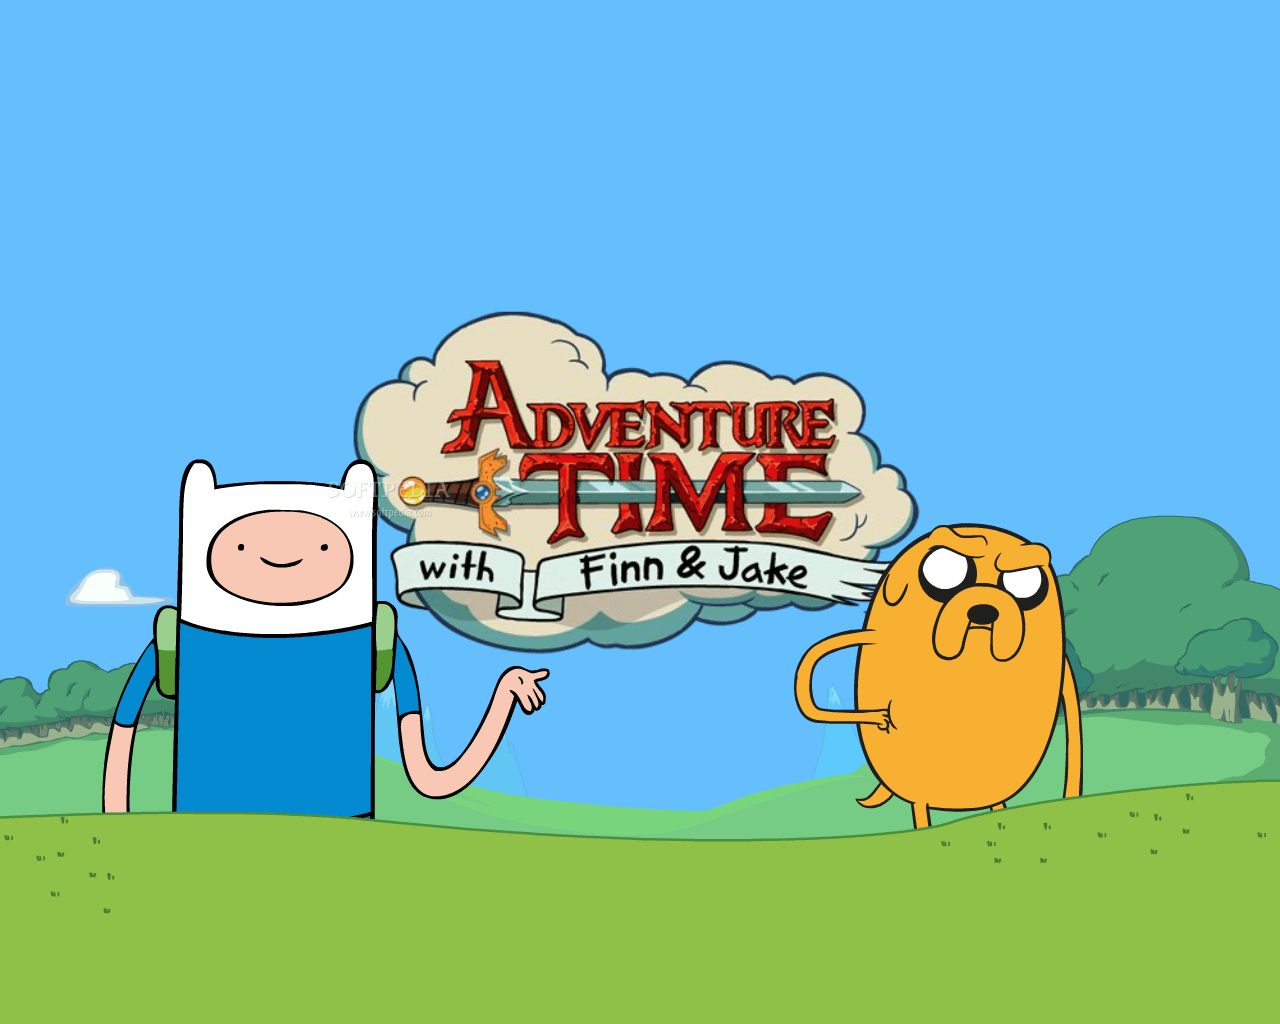 Adventure Time Logo Wallpapers - Top